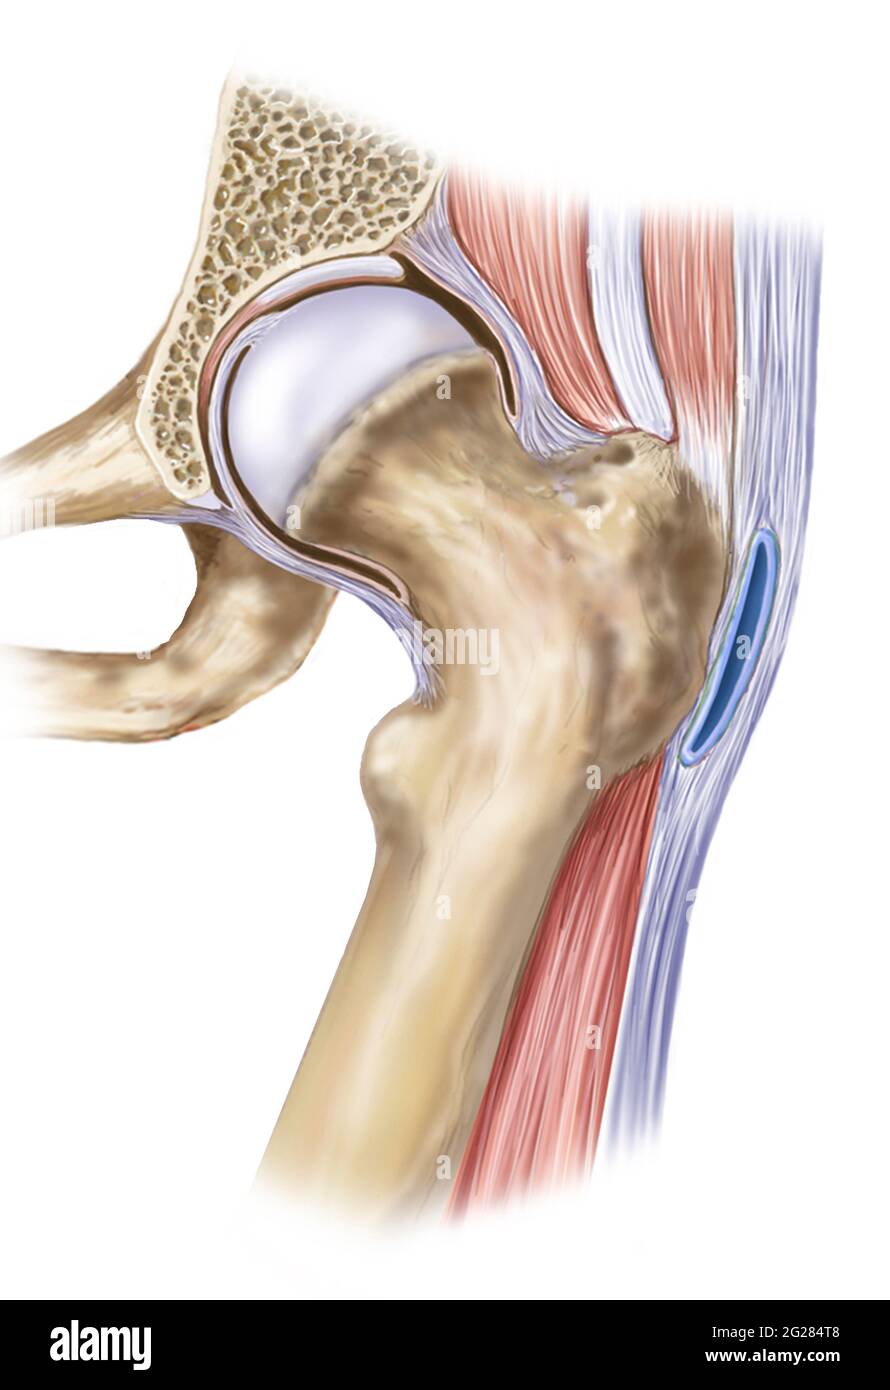 Hip joint showing greater trochanter bursa and ligaments. Stock Photo